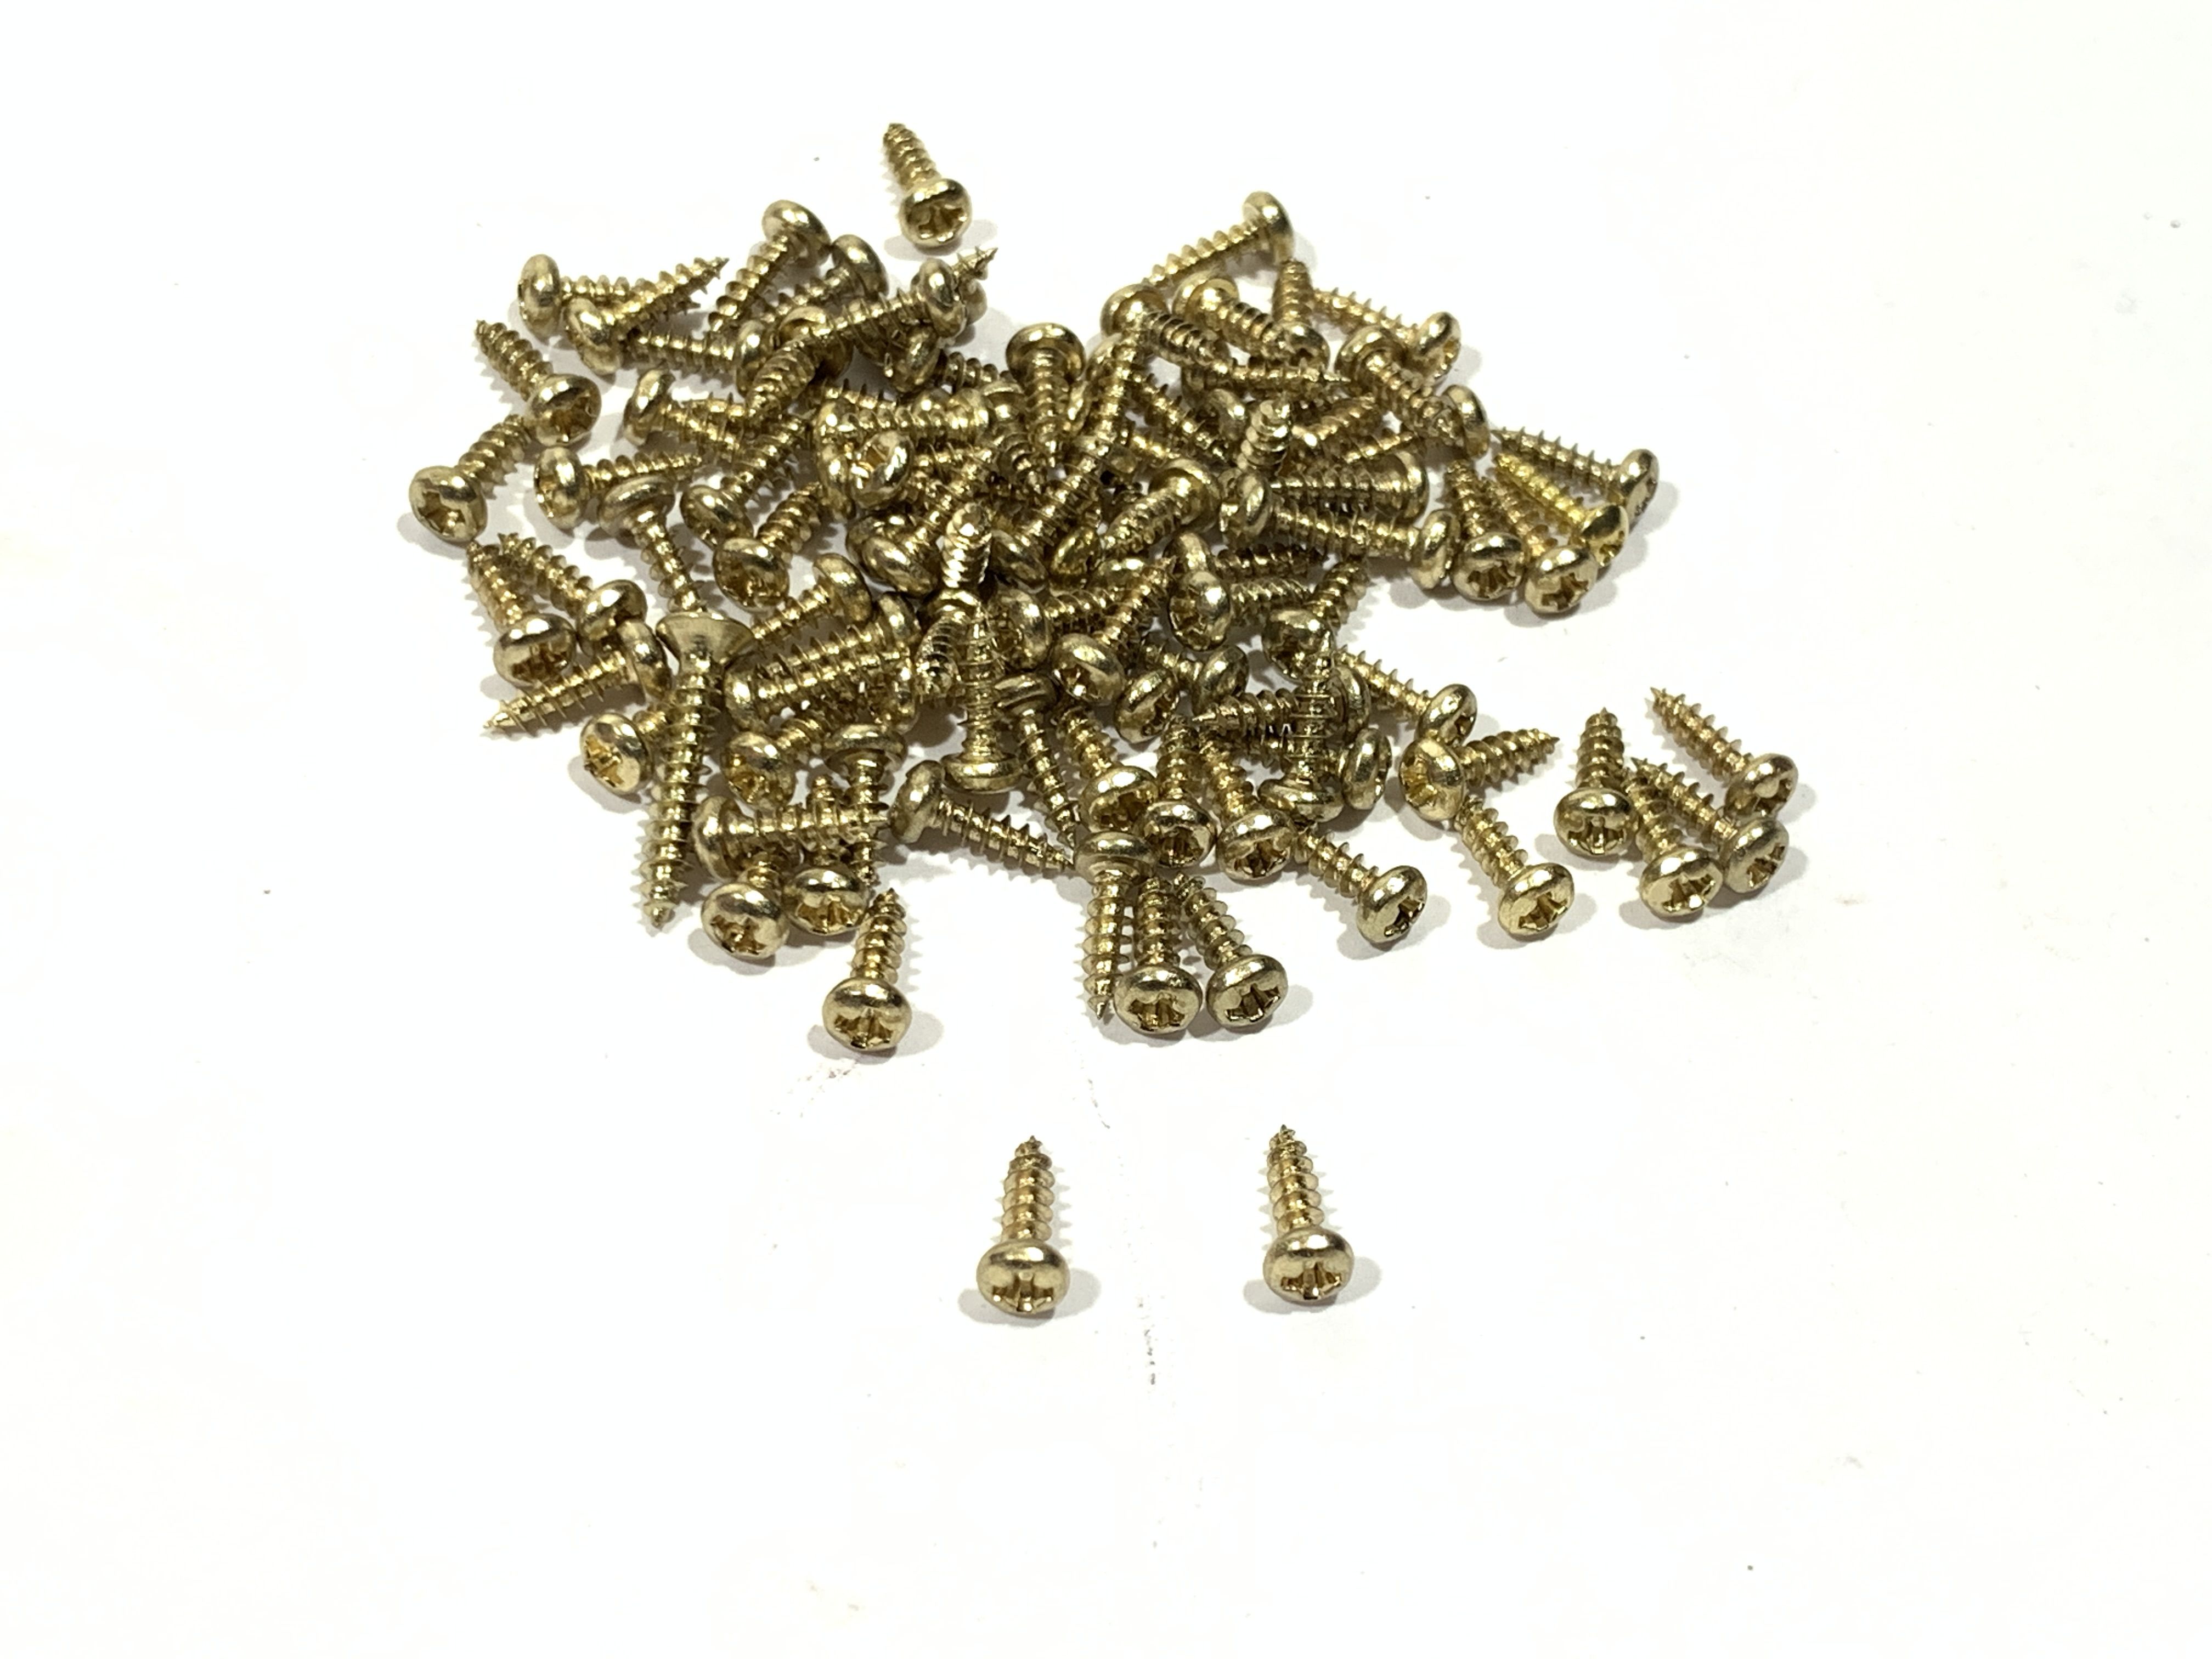 10 #14x4 Round Head Slotted Wood Screws Steel Zinc Plated Good Holding Power in Different Materials - Durable and Sturdy 